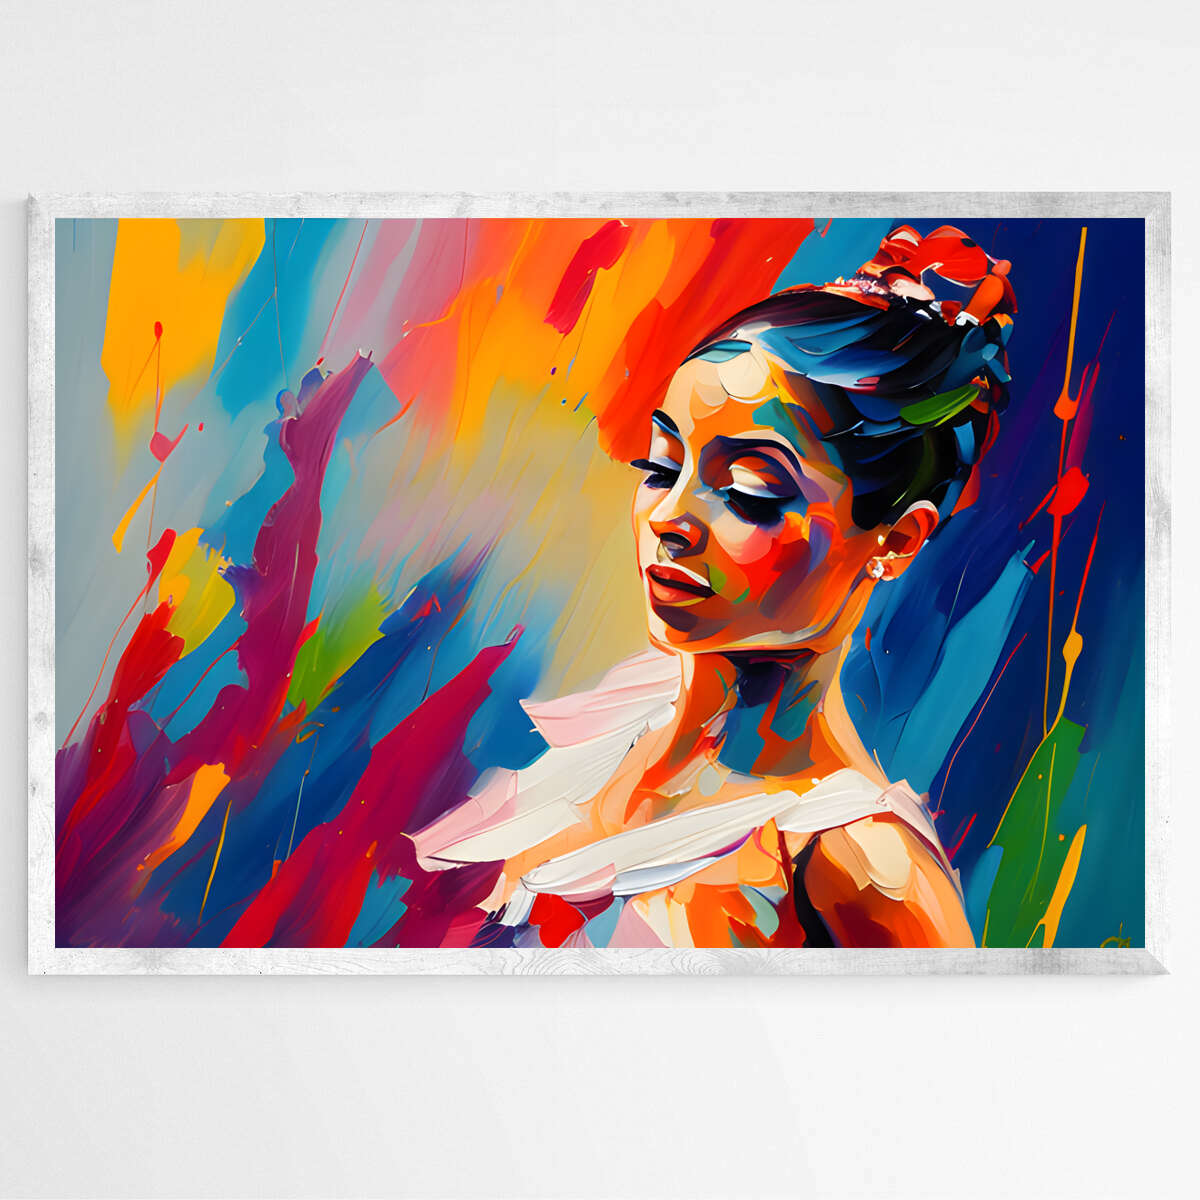 The Dancer's Palette | Abstract Wall Art Prints - The Canvas Hive